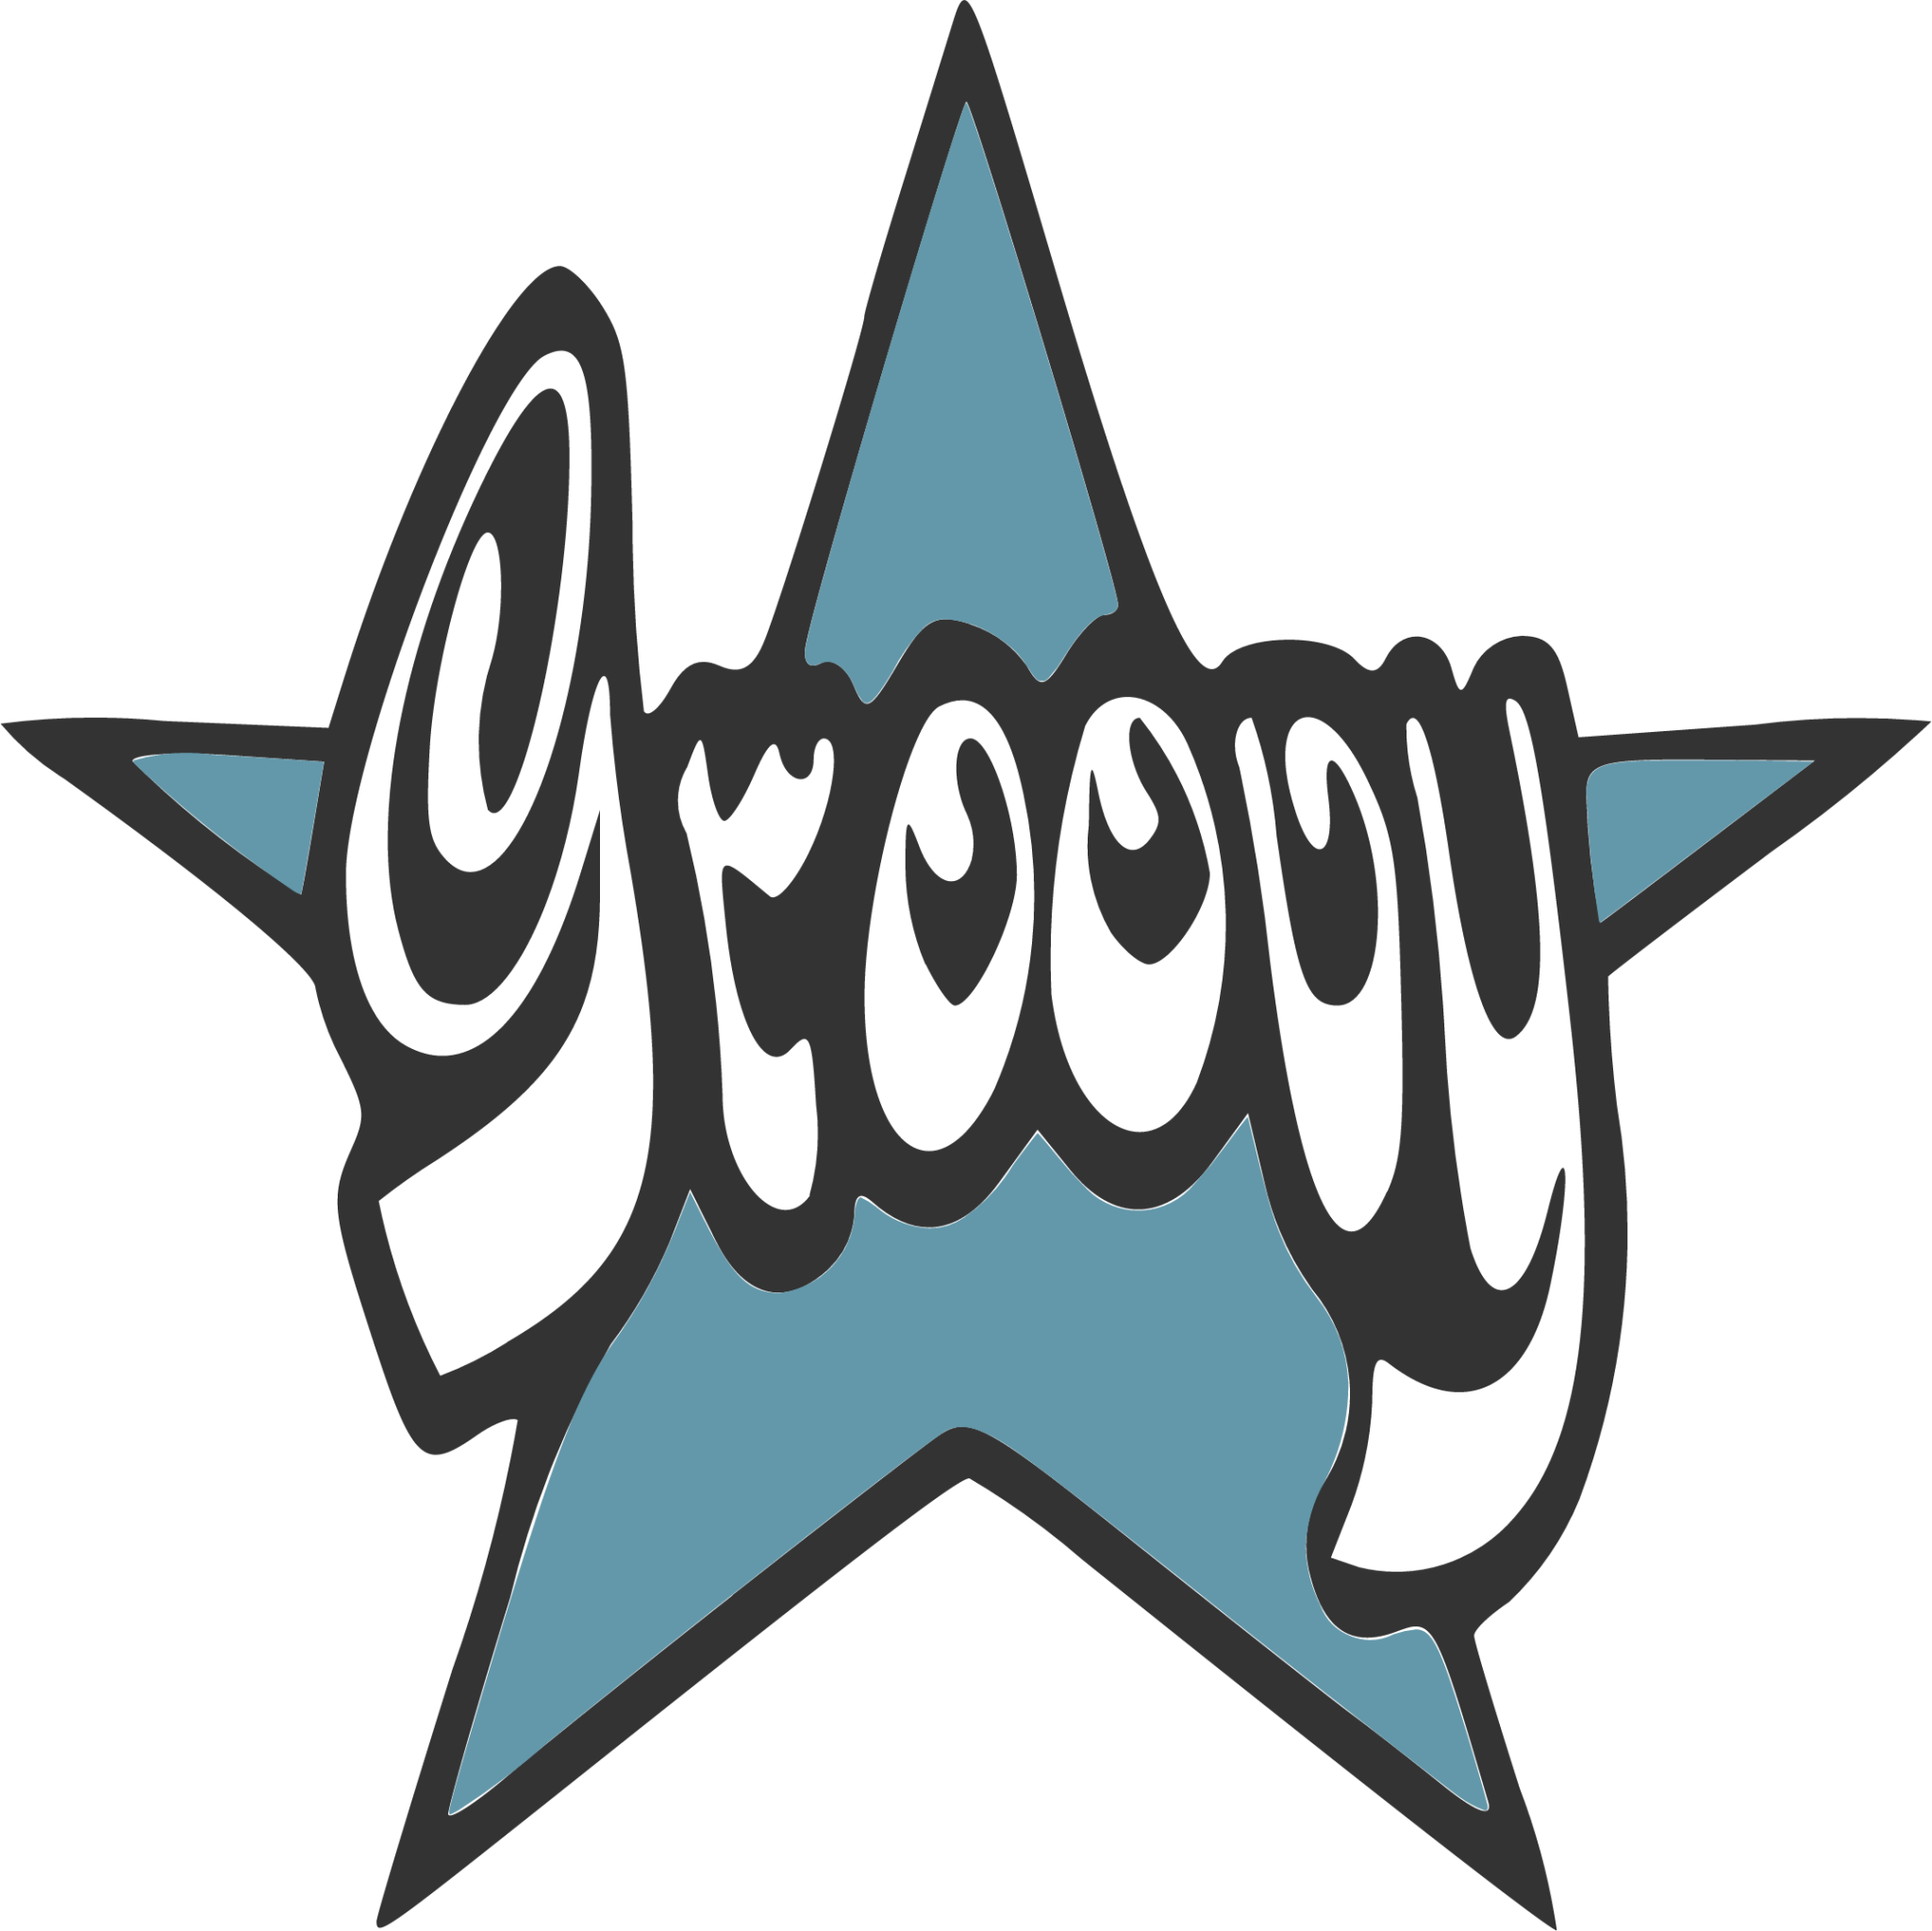 file type groovy2 icon